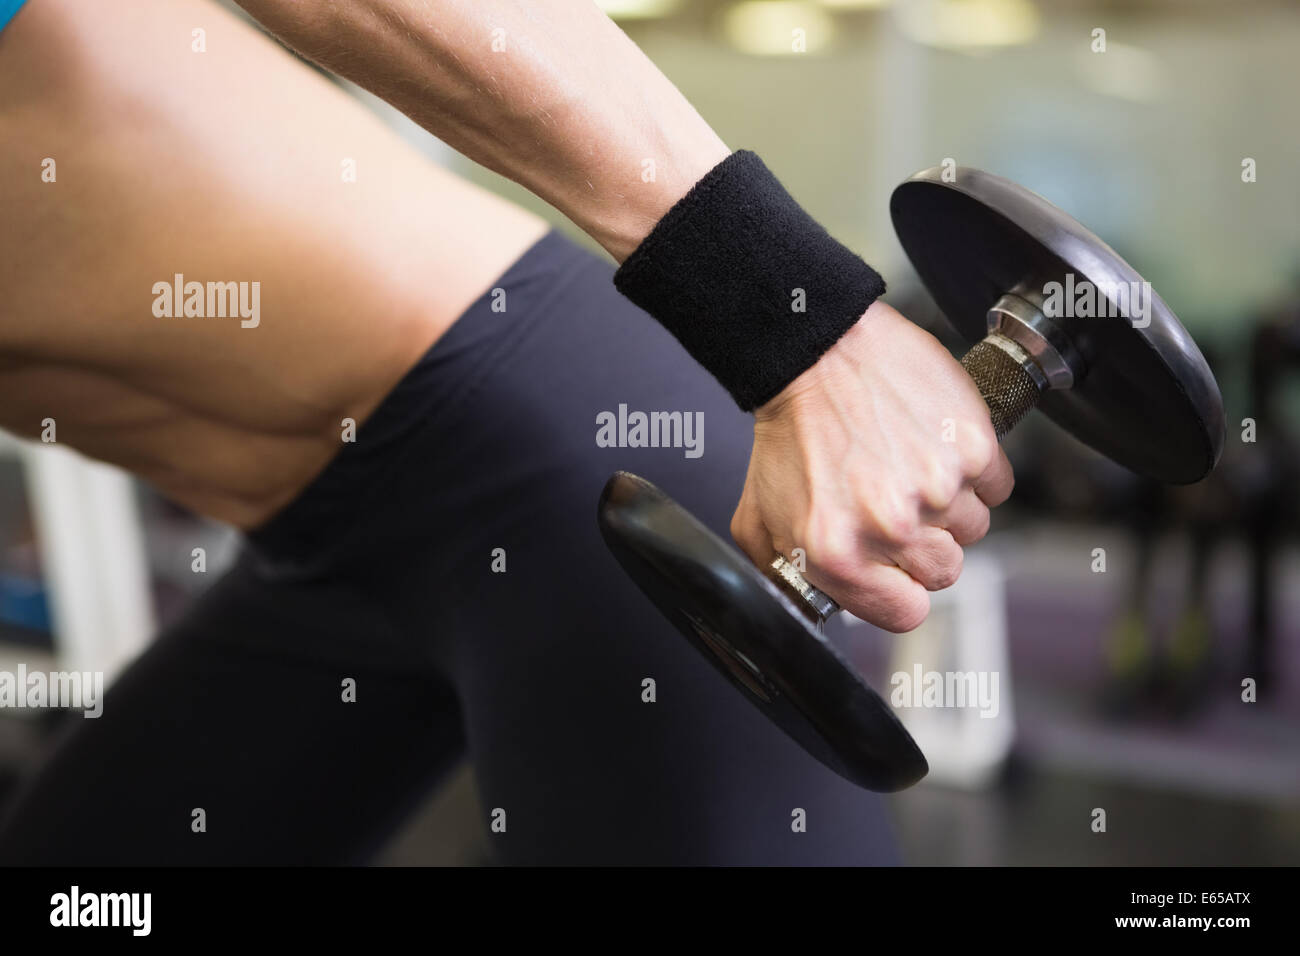 Mid section of fit woman exercising with dumbbell in gym Stock Photo